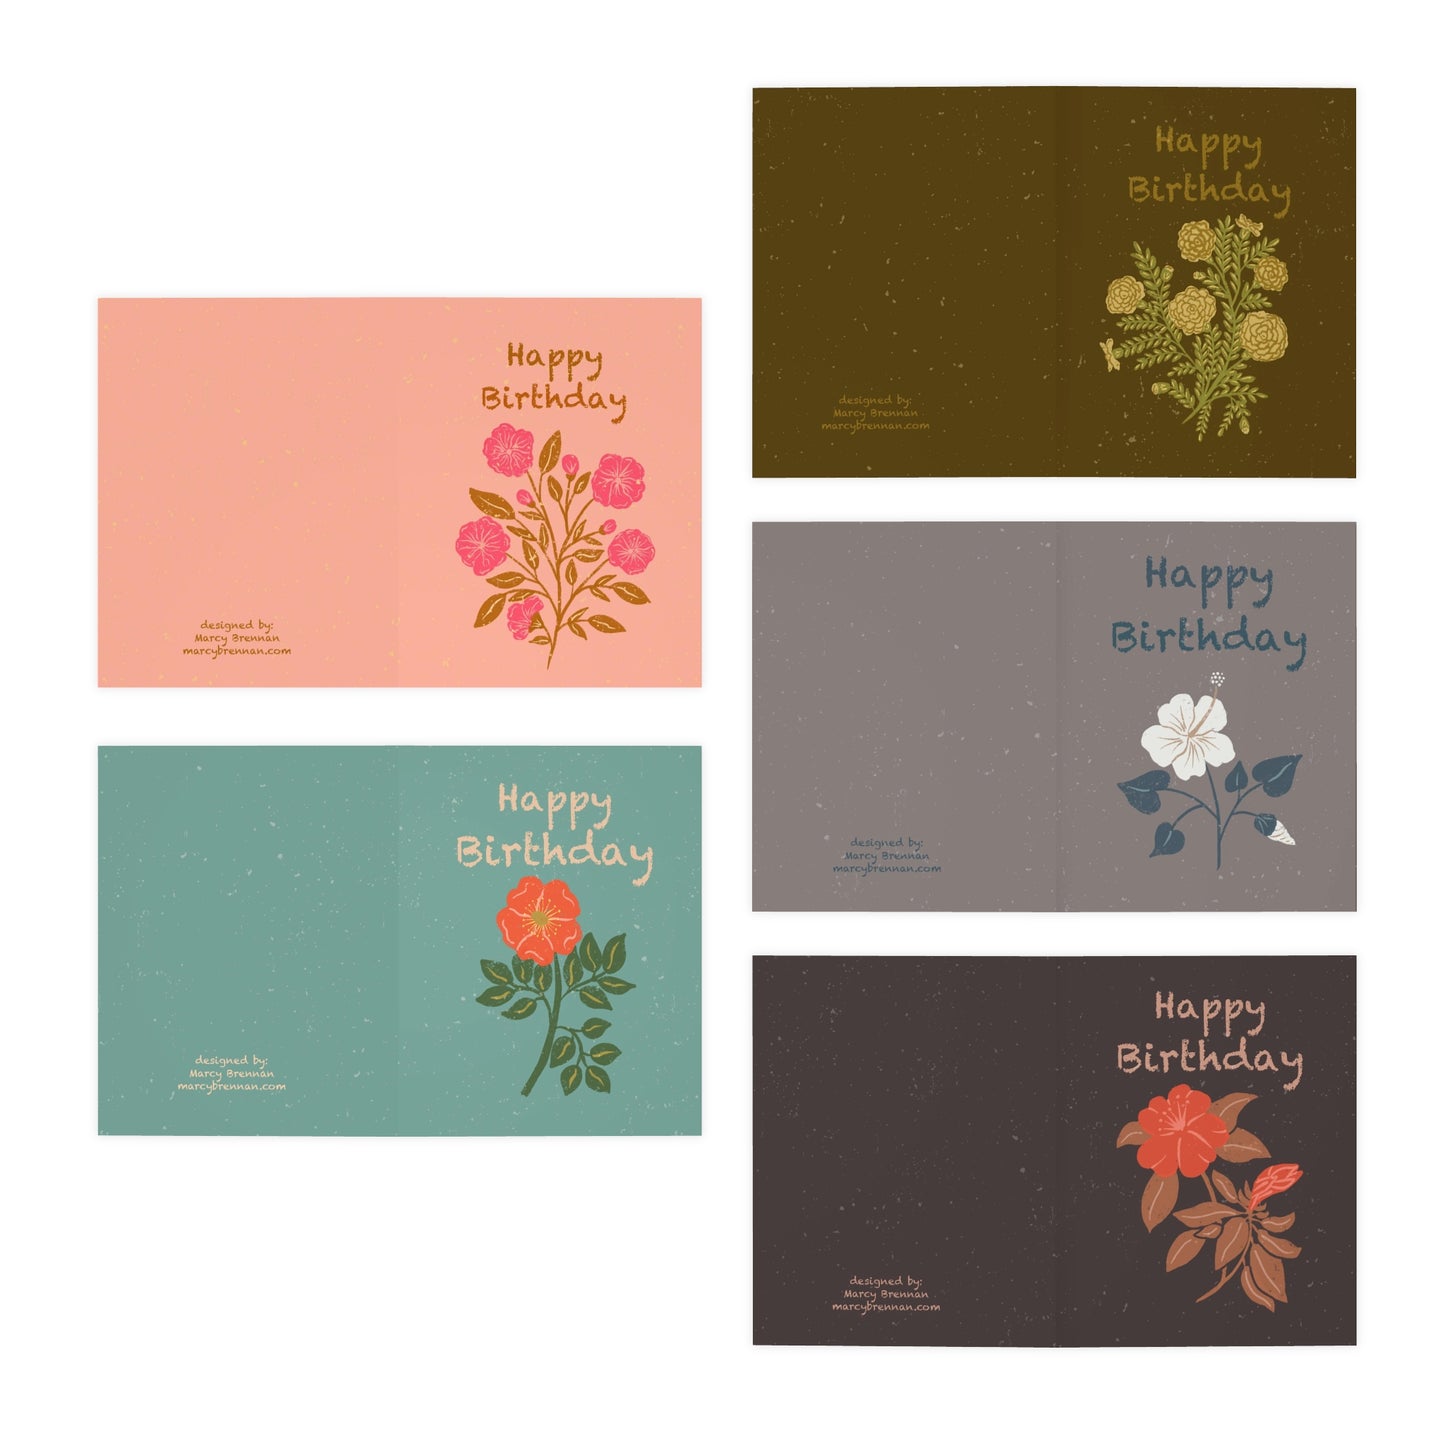 Birthday Cards with Five Different Block Print Style Flower Designs in Retro Colors — Multi-Design Greeting Cards (5-Pack) with Envelopes — Ships only in Continental US and Shipping is FREE